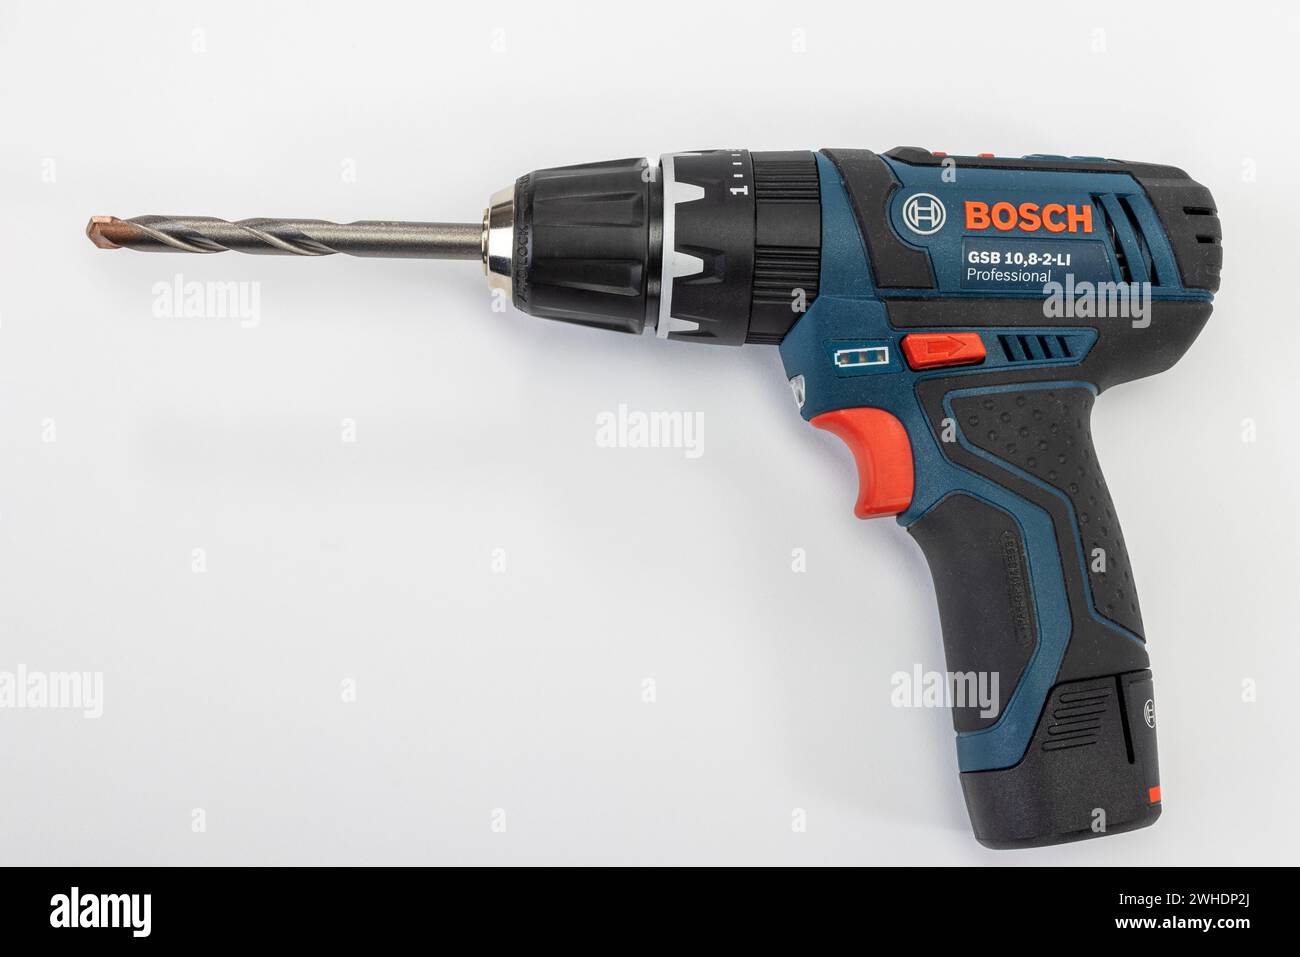 Cordless drill from Bosch, with inserted masonry drill bit, white background, Stock Photo